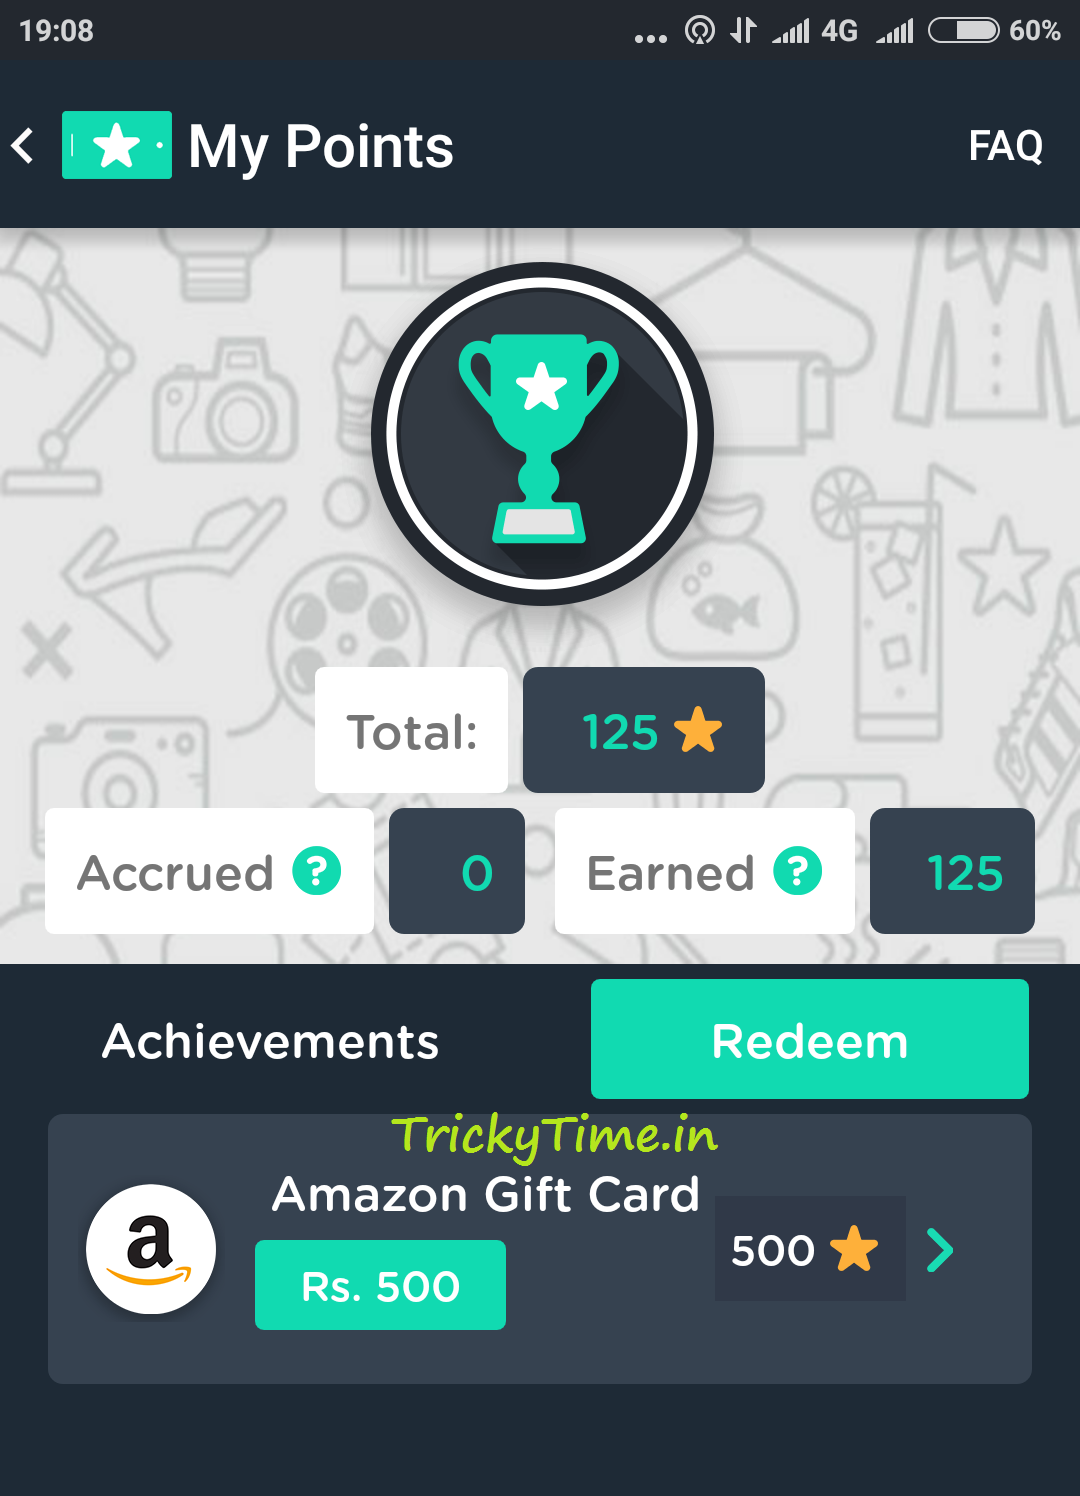 [Loot] PointsWala App: Get Rs.105 on Signup & Earn Unlimited Amazon Gift Vouchers (Rs.25/Refer)